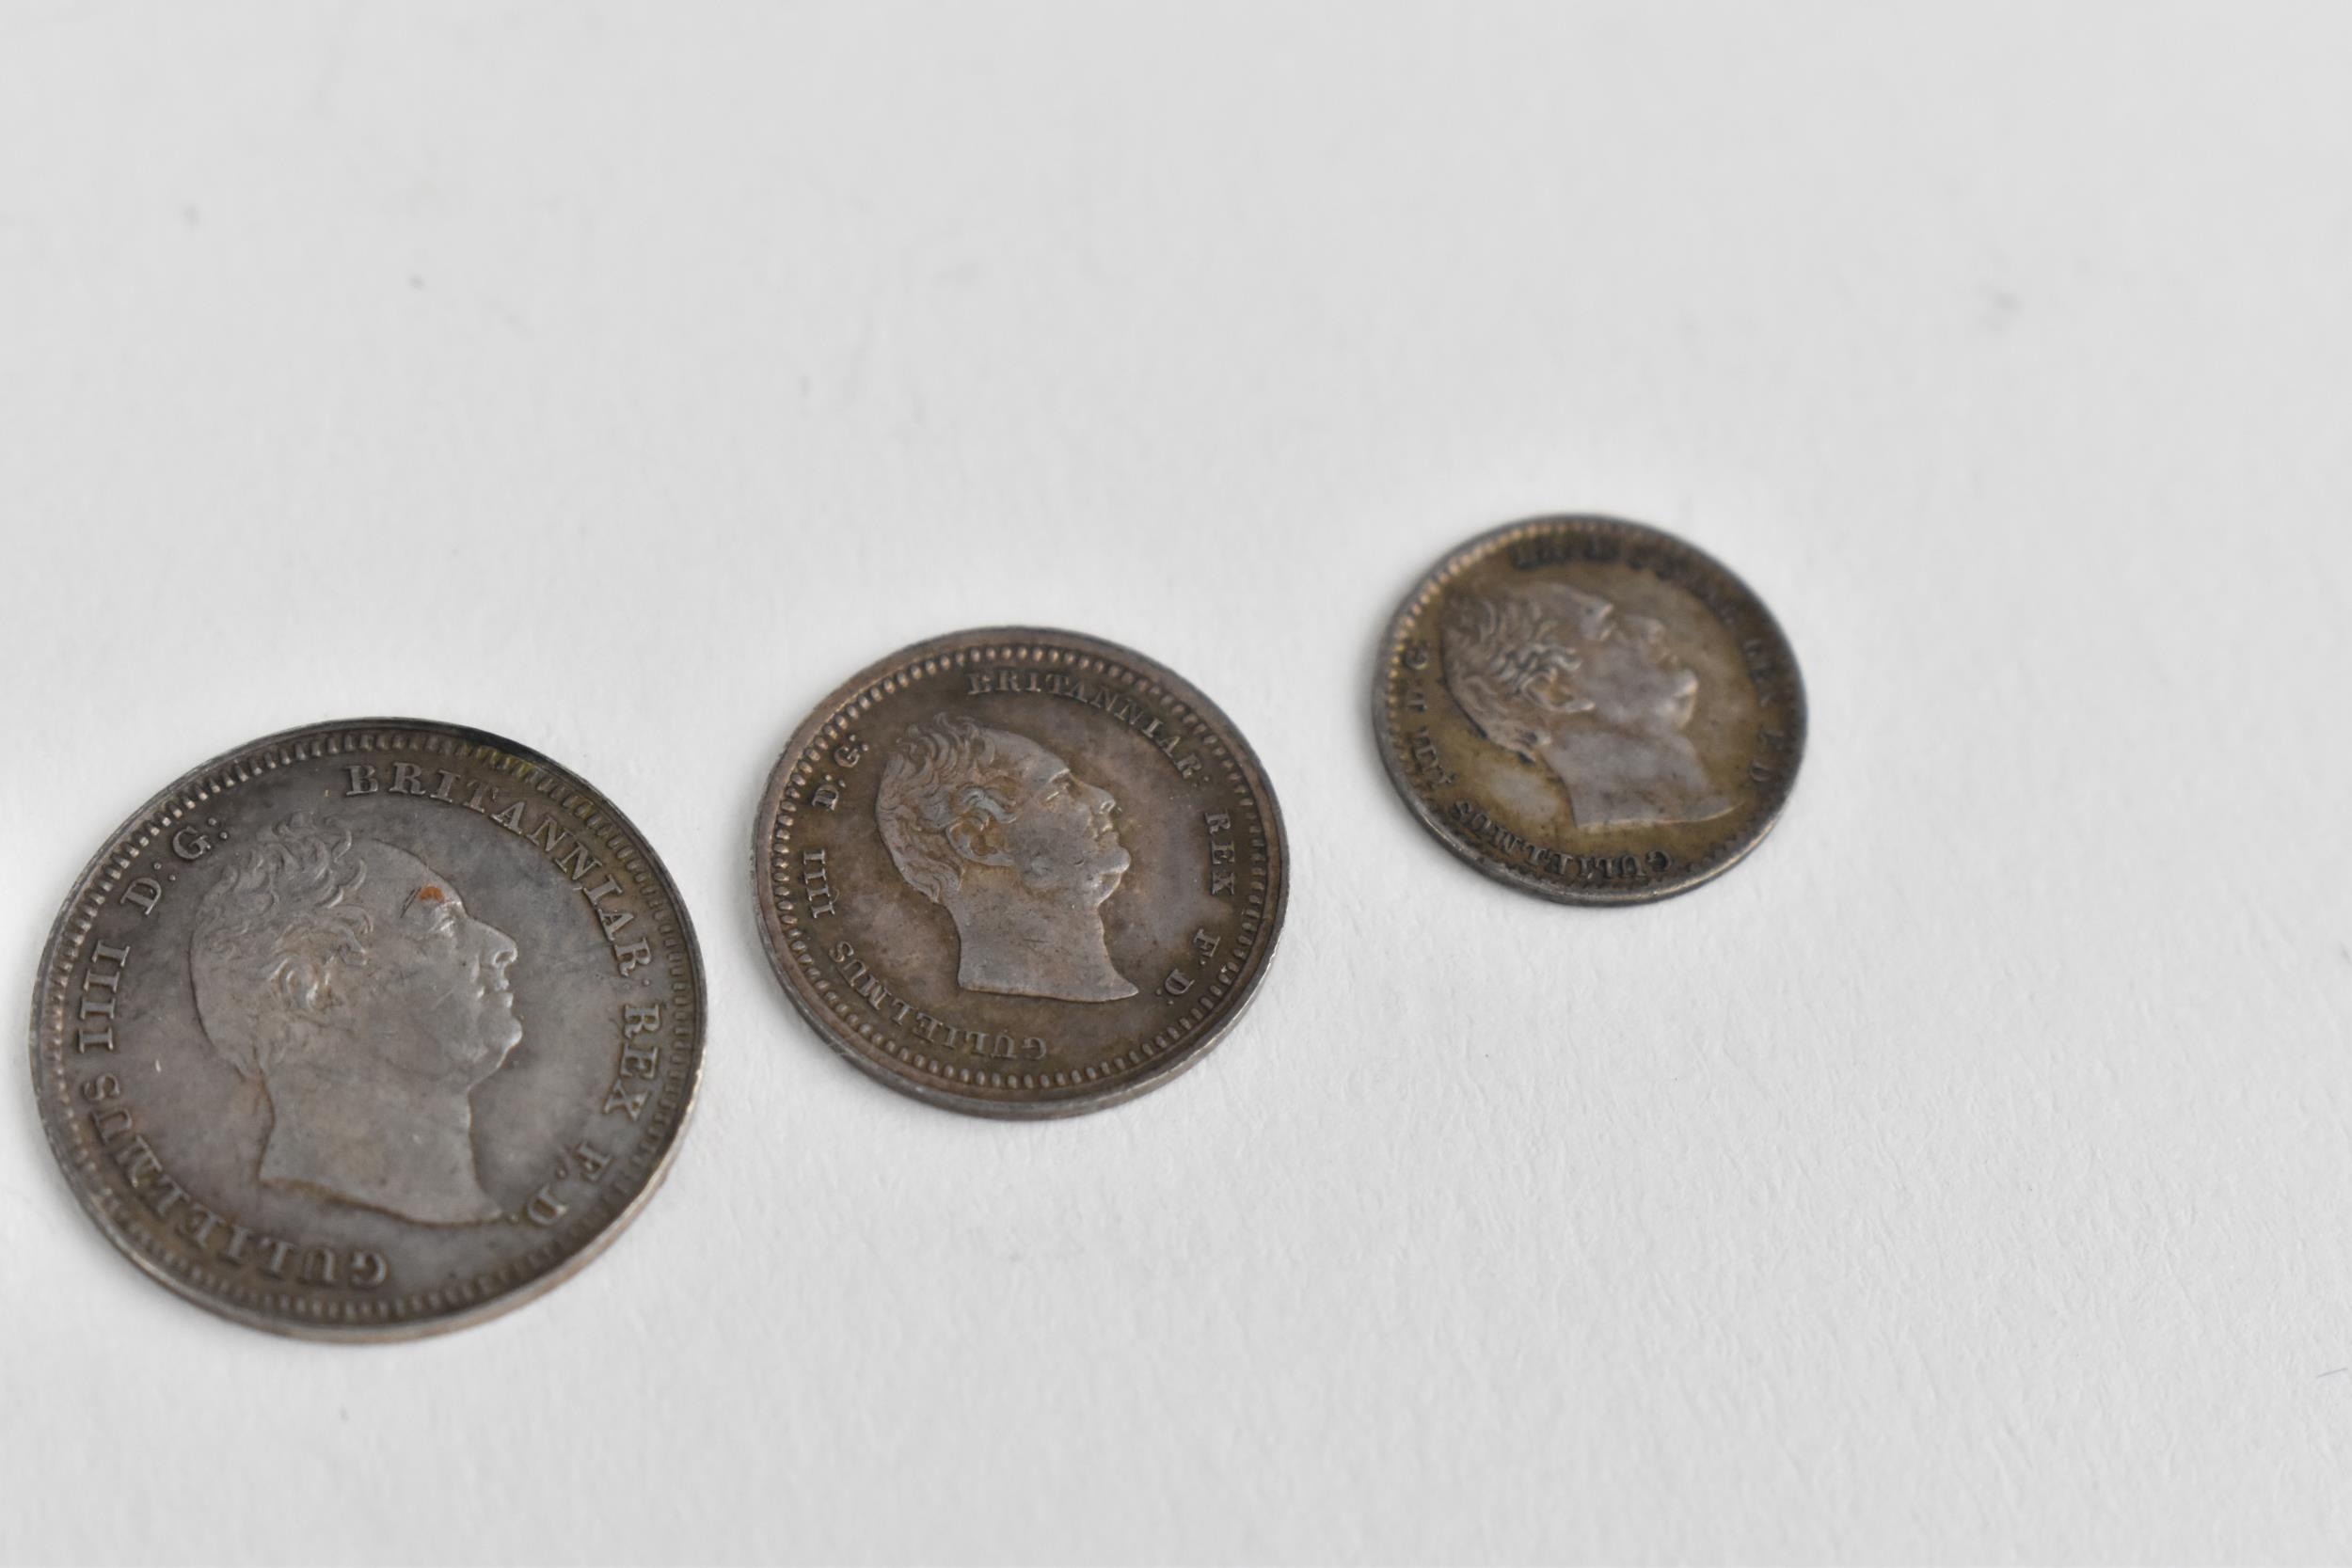 United Kingdom - William IV (1830-1837), Maundy Set, dated 1835, 4d, 3d, 2d and 1d - Image 3 of 6